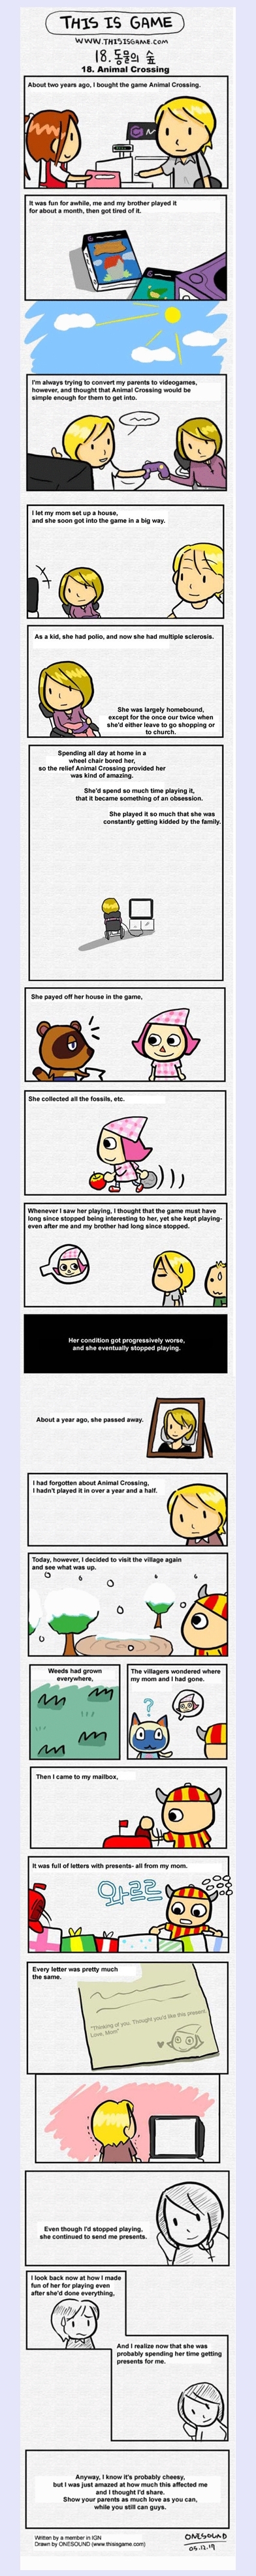 This is Game #18 Animal Crossing by Onesound